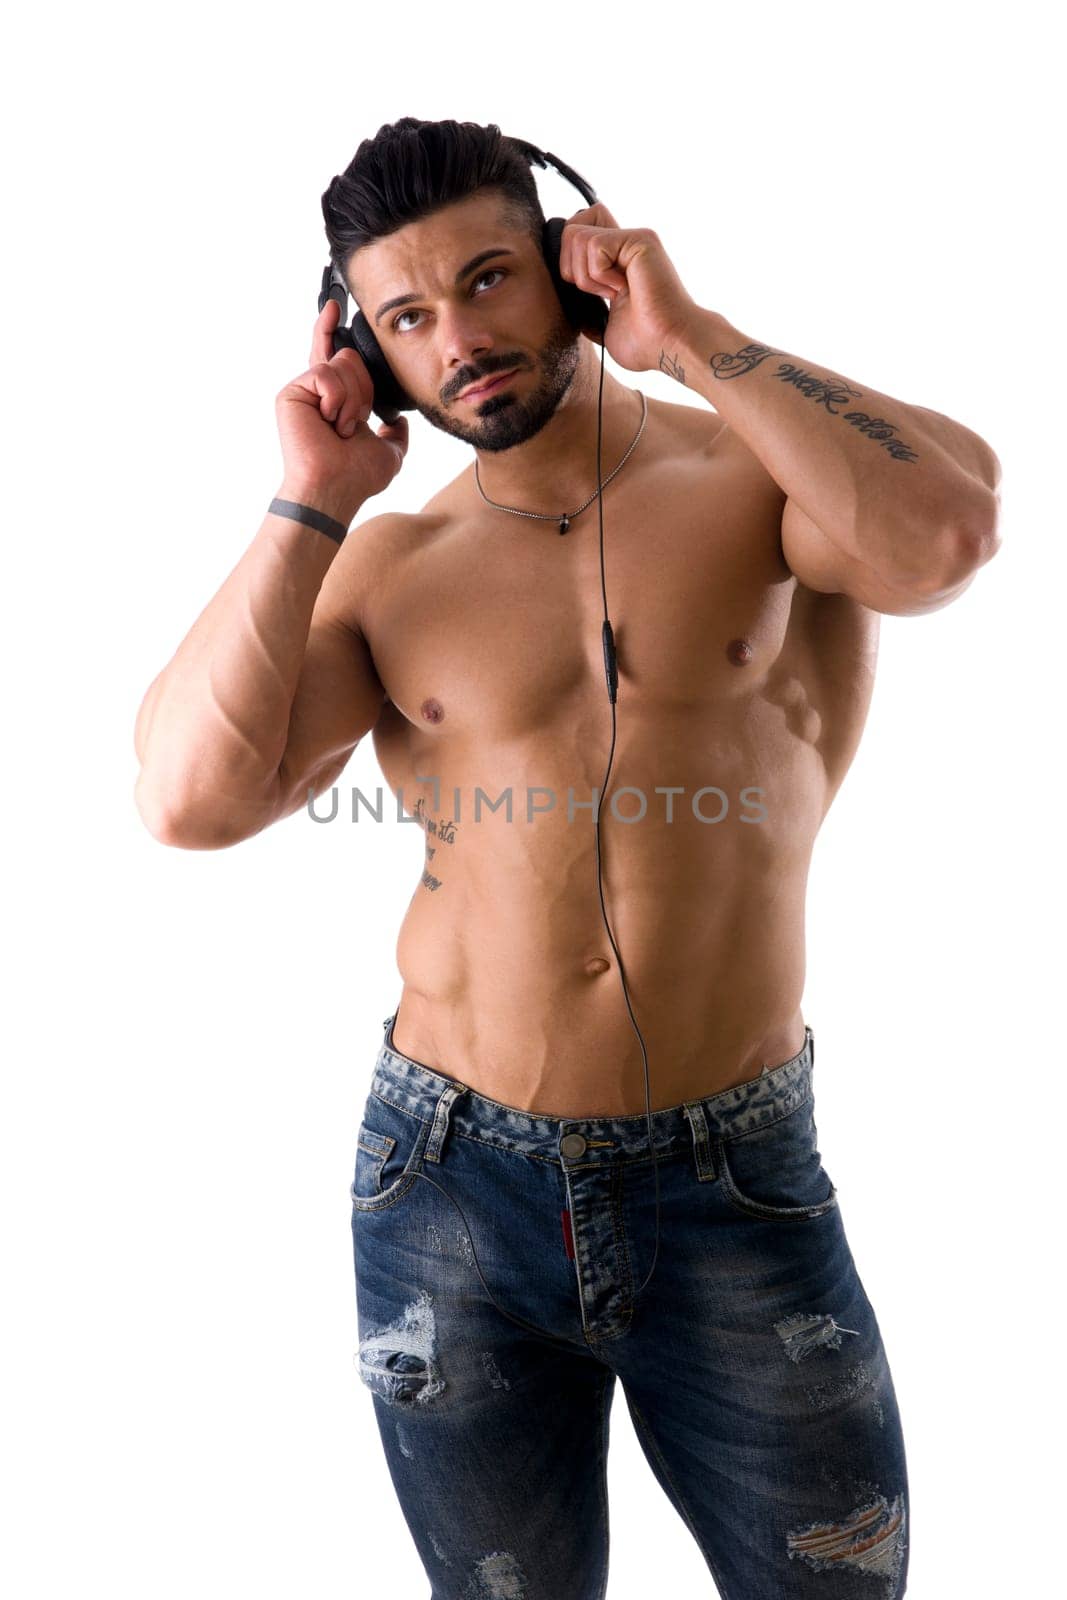 A Shirtless Man Listening to Music with Headphones by artofphoto